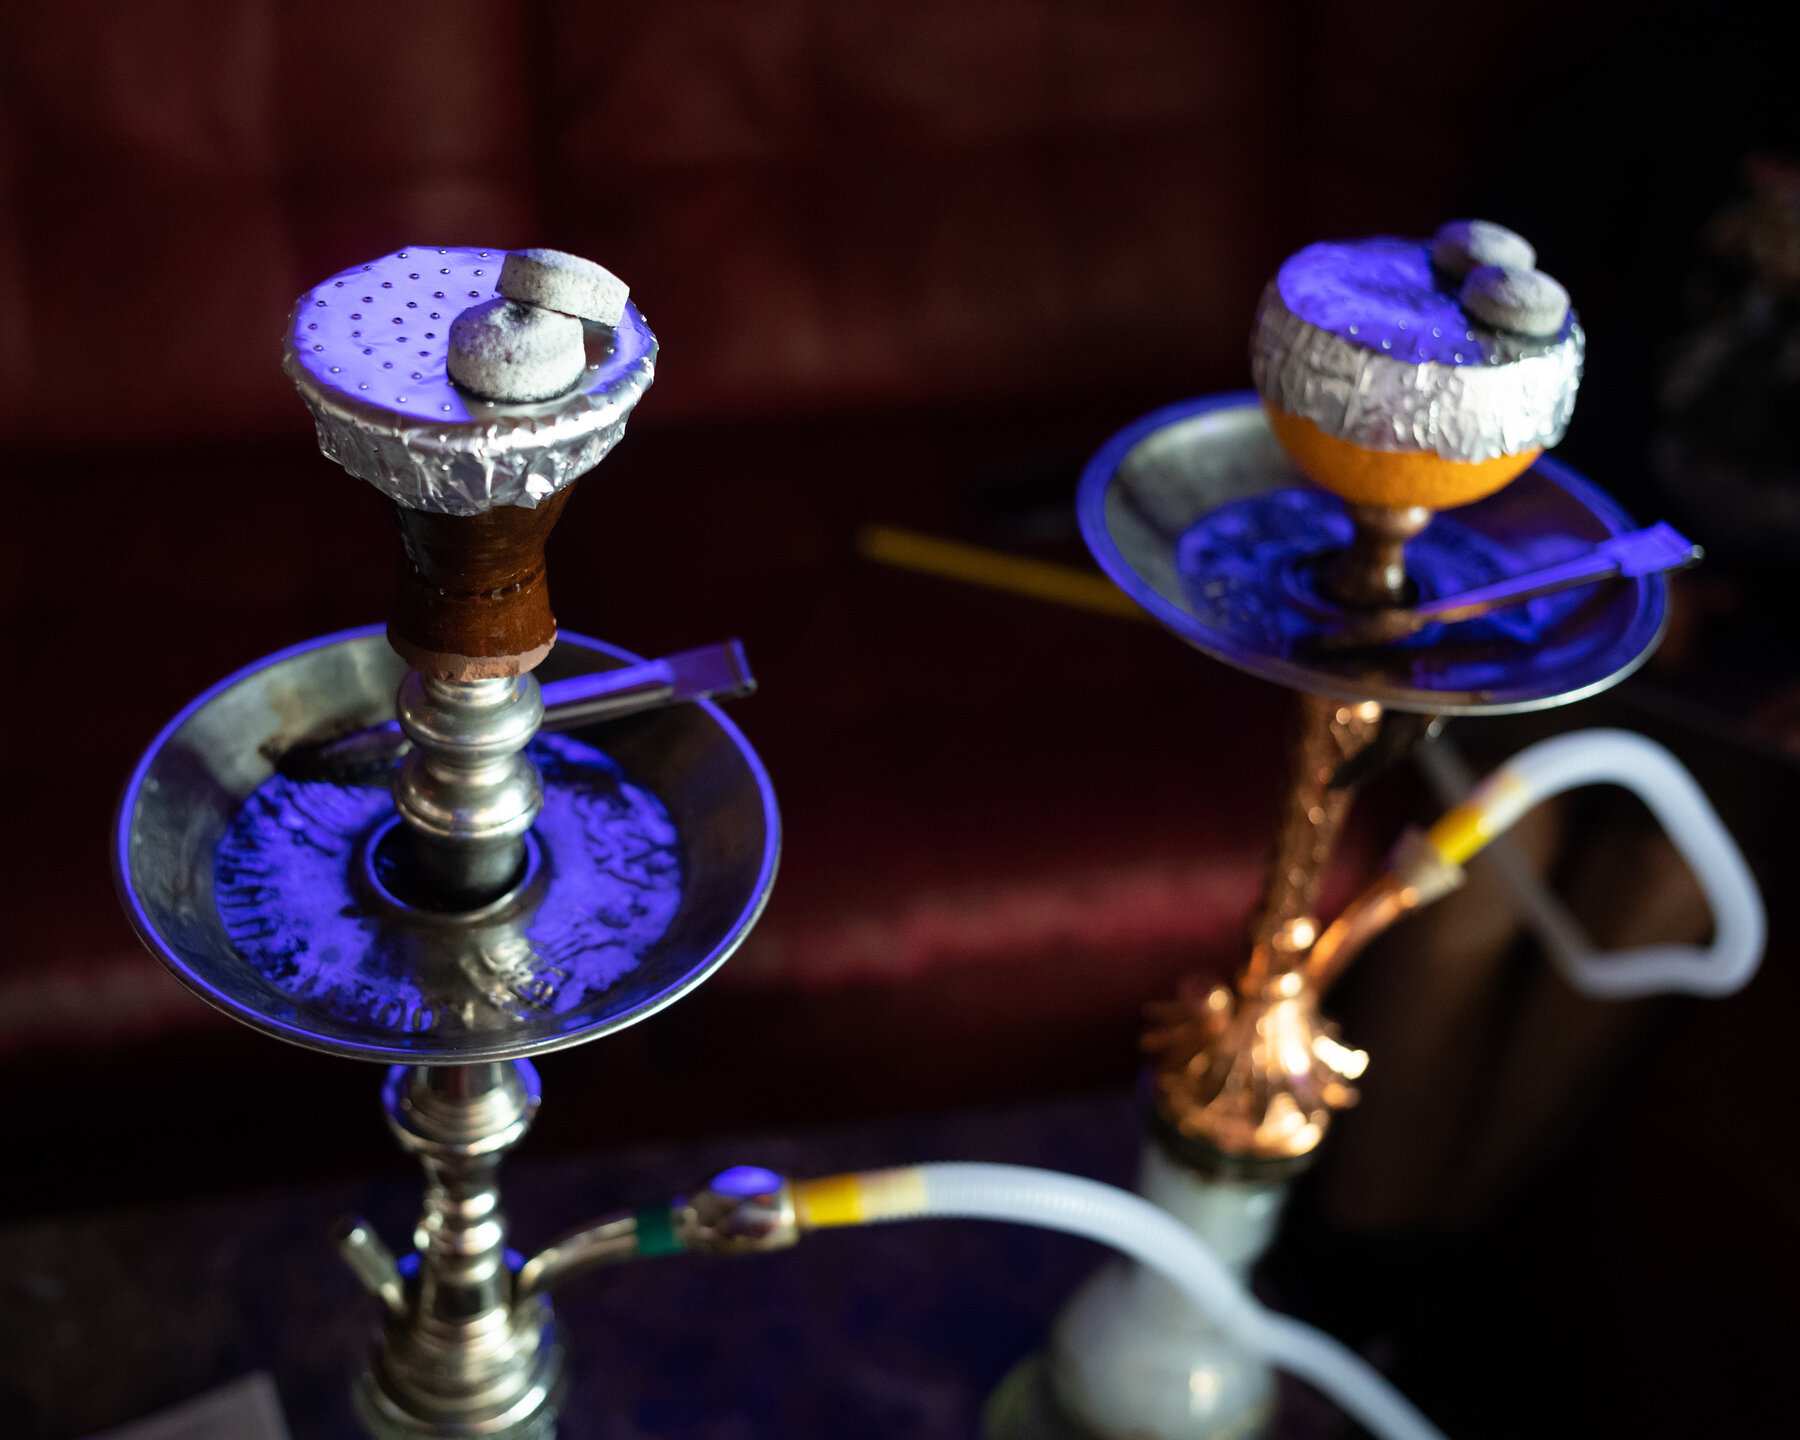 Two hookah pipes on a table in a dimly lit indoor lounge.